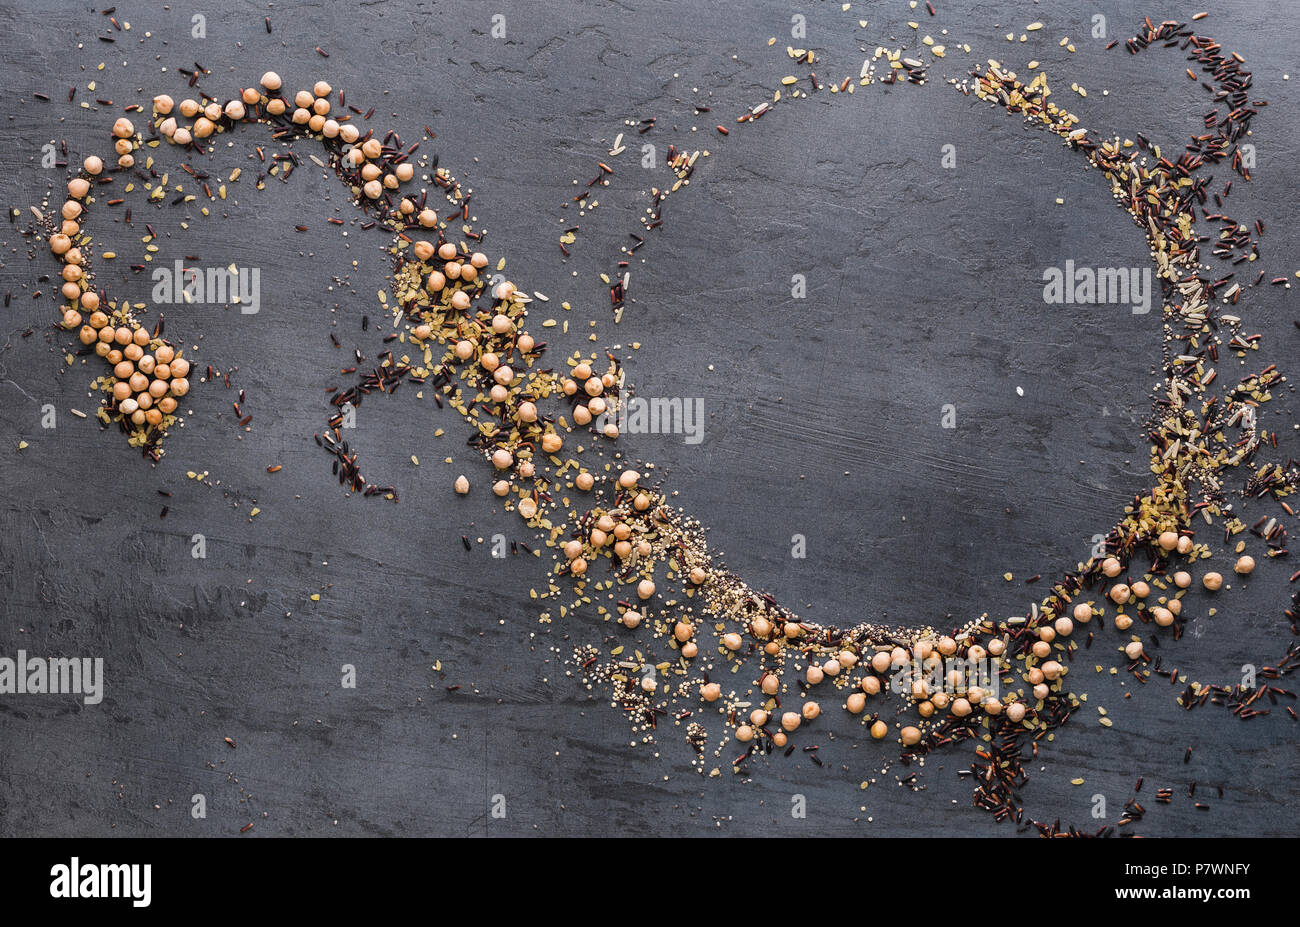 Pattern of different seeds for a healthy food on dark background. Seeds of quinoa, chia, bulgur, chickpeas, black rice and brown rice, top view Stock Photo